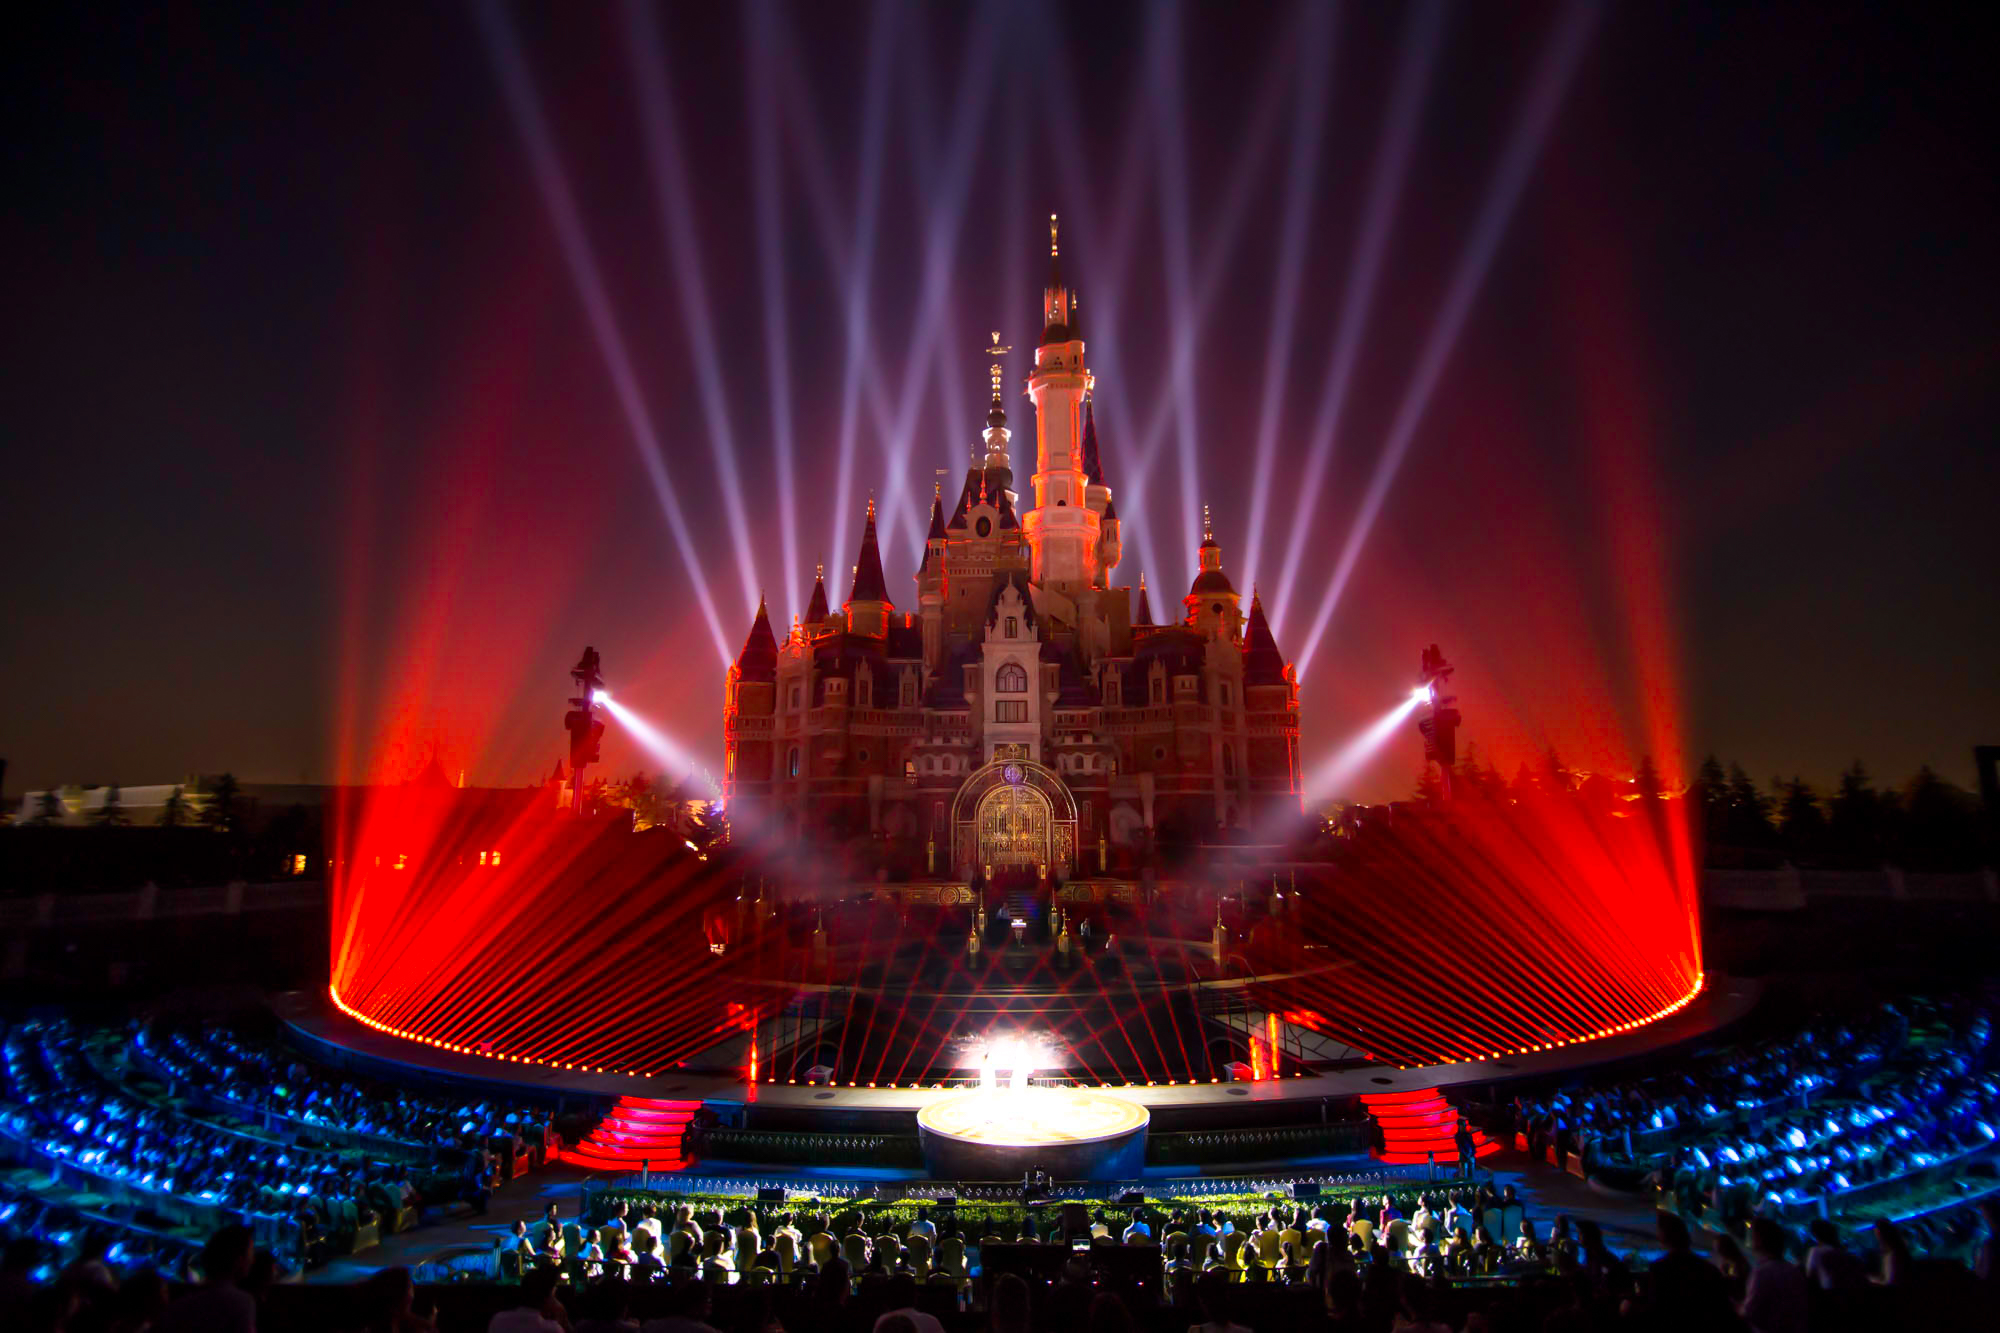 Grand Opening Ceremony of the largest Disney castle in the 